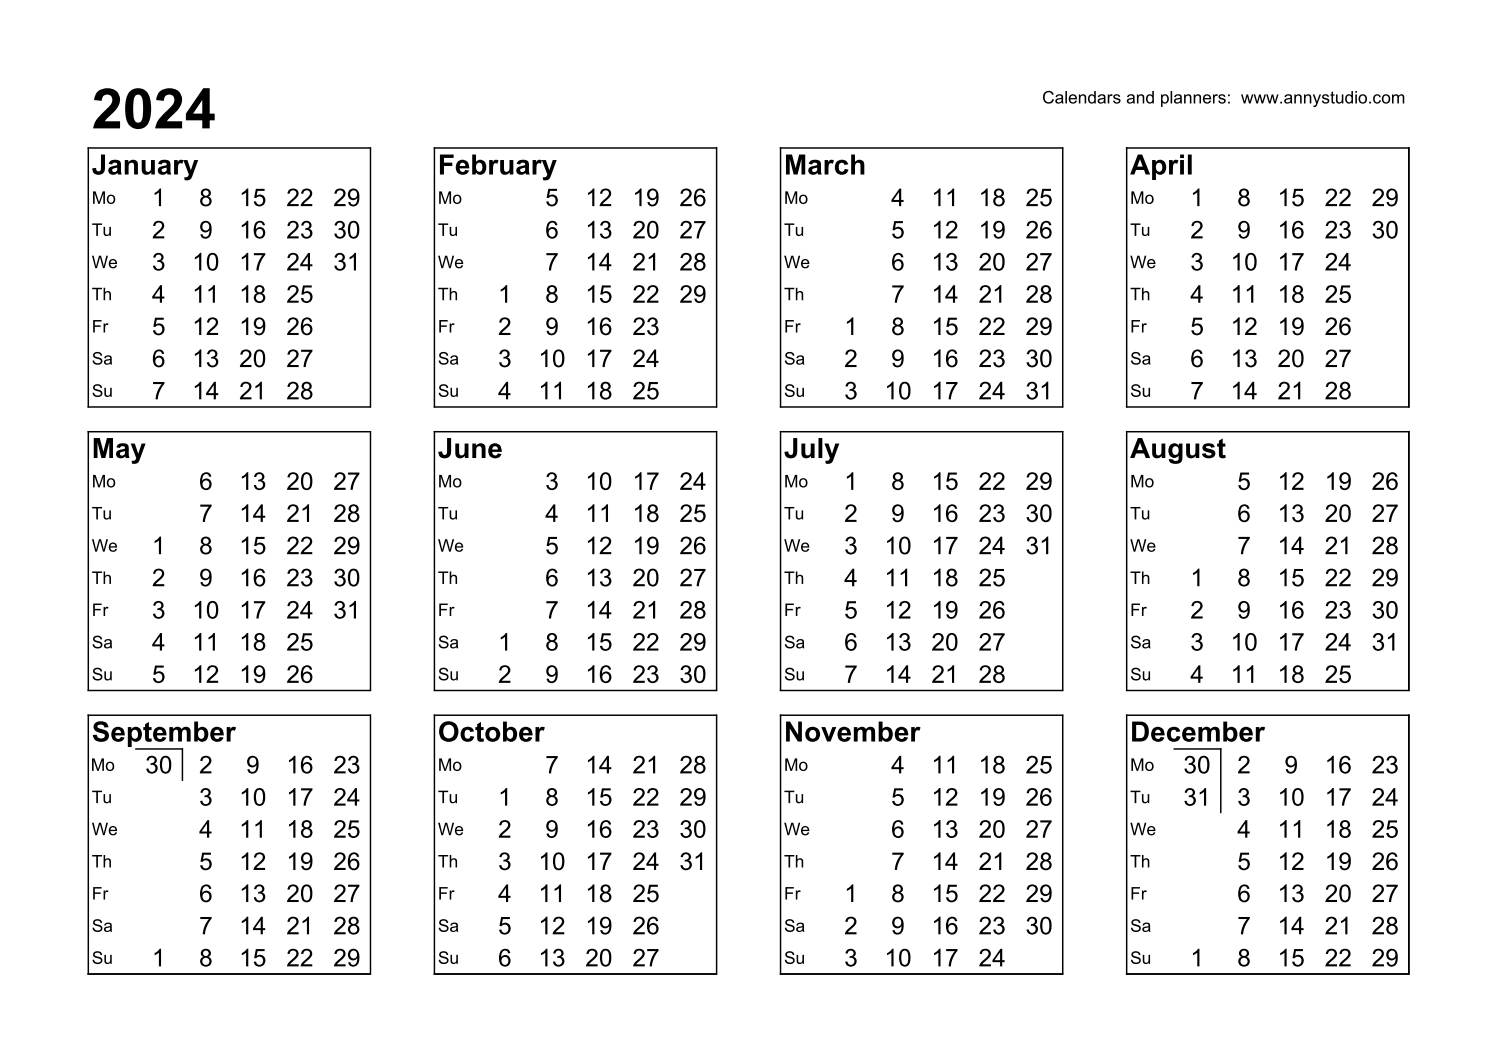 Free Printable Calendars And Planners 2024, 2025 And 2026 | Printable Calendar 2024 With Week Numbers